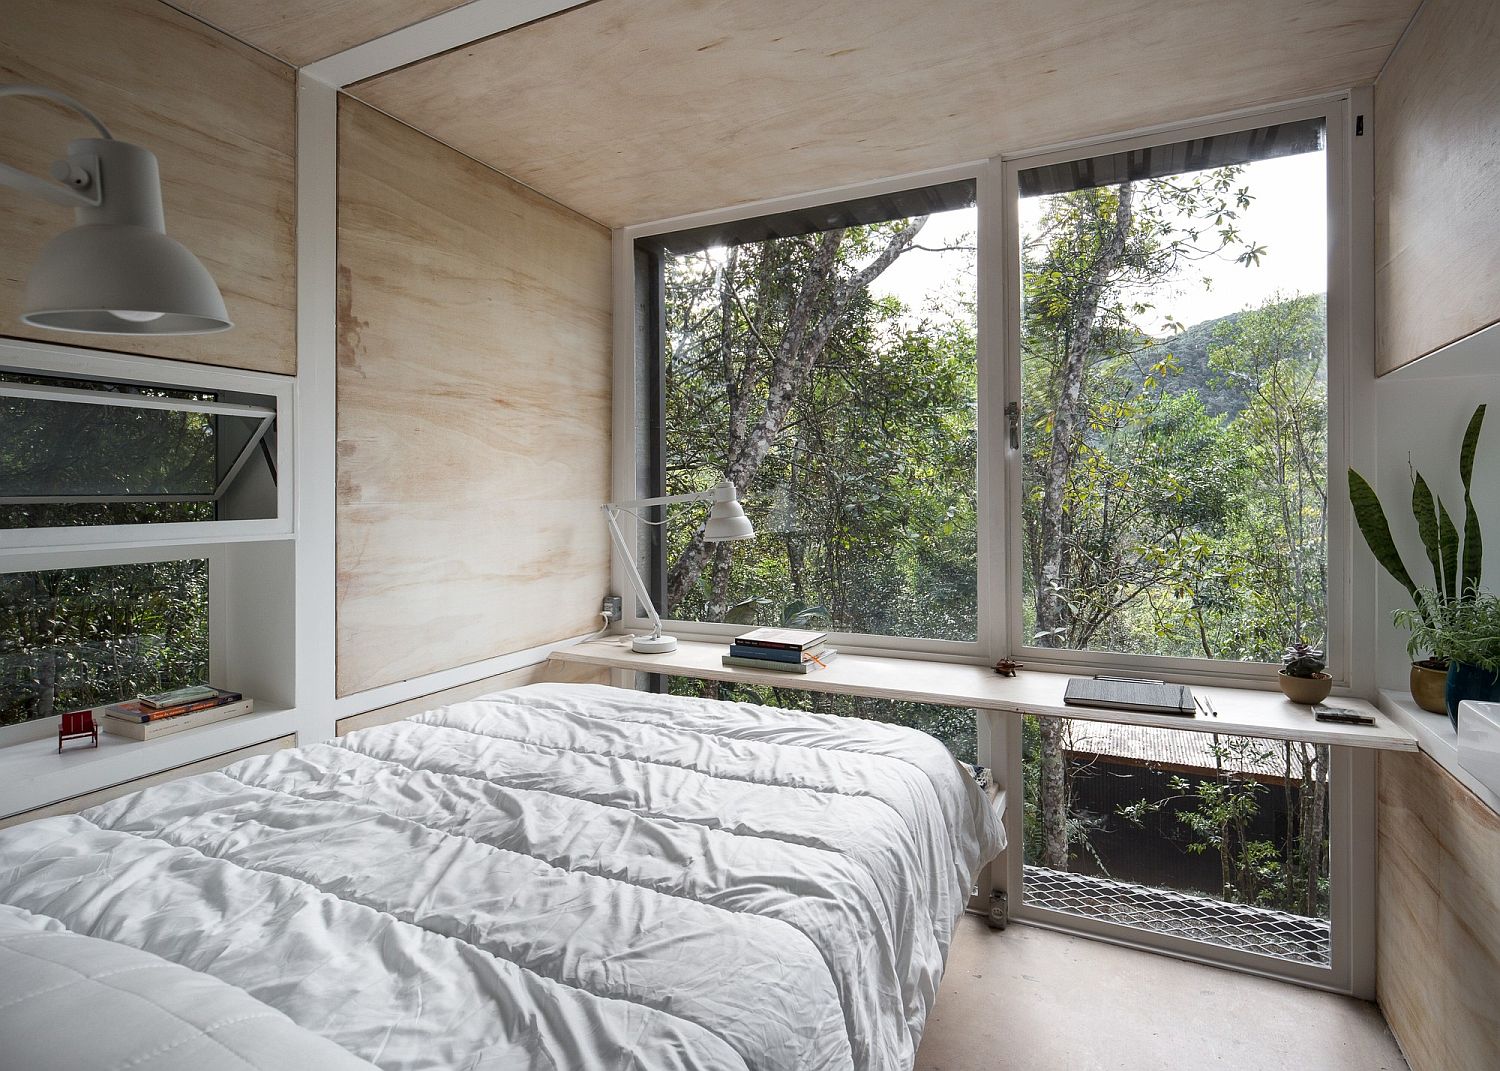 Ultra-tiny cabin with bed, table and sink